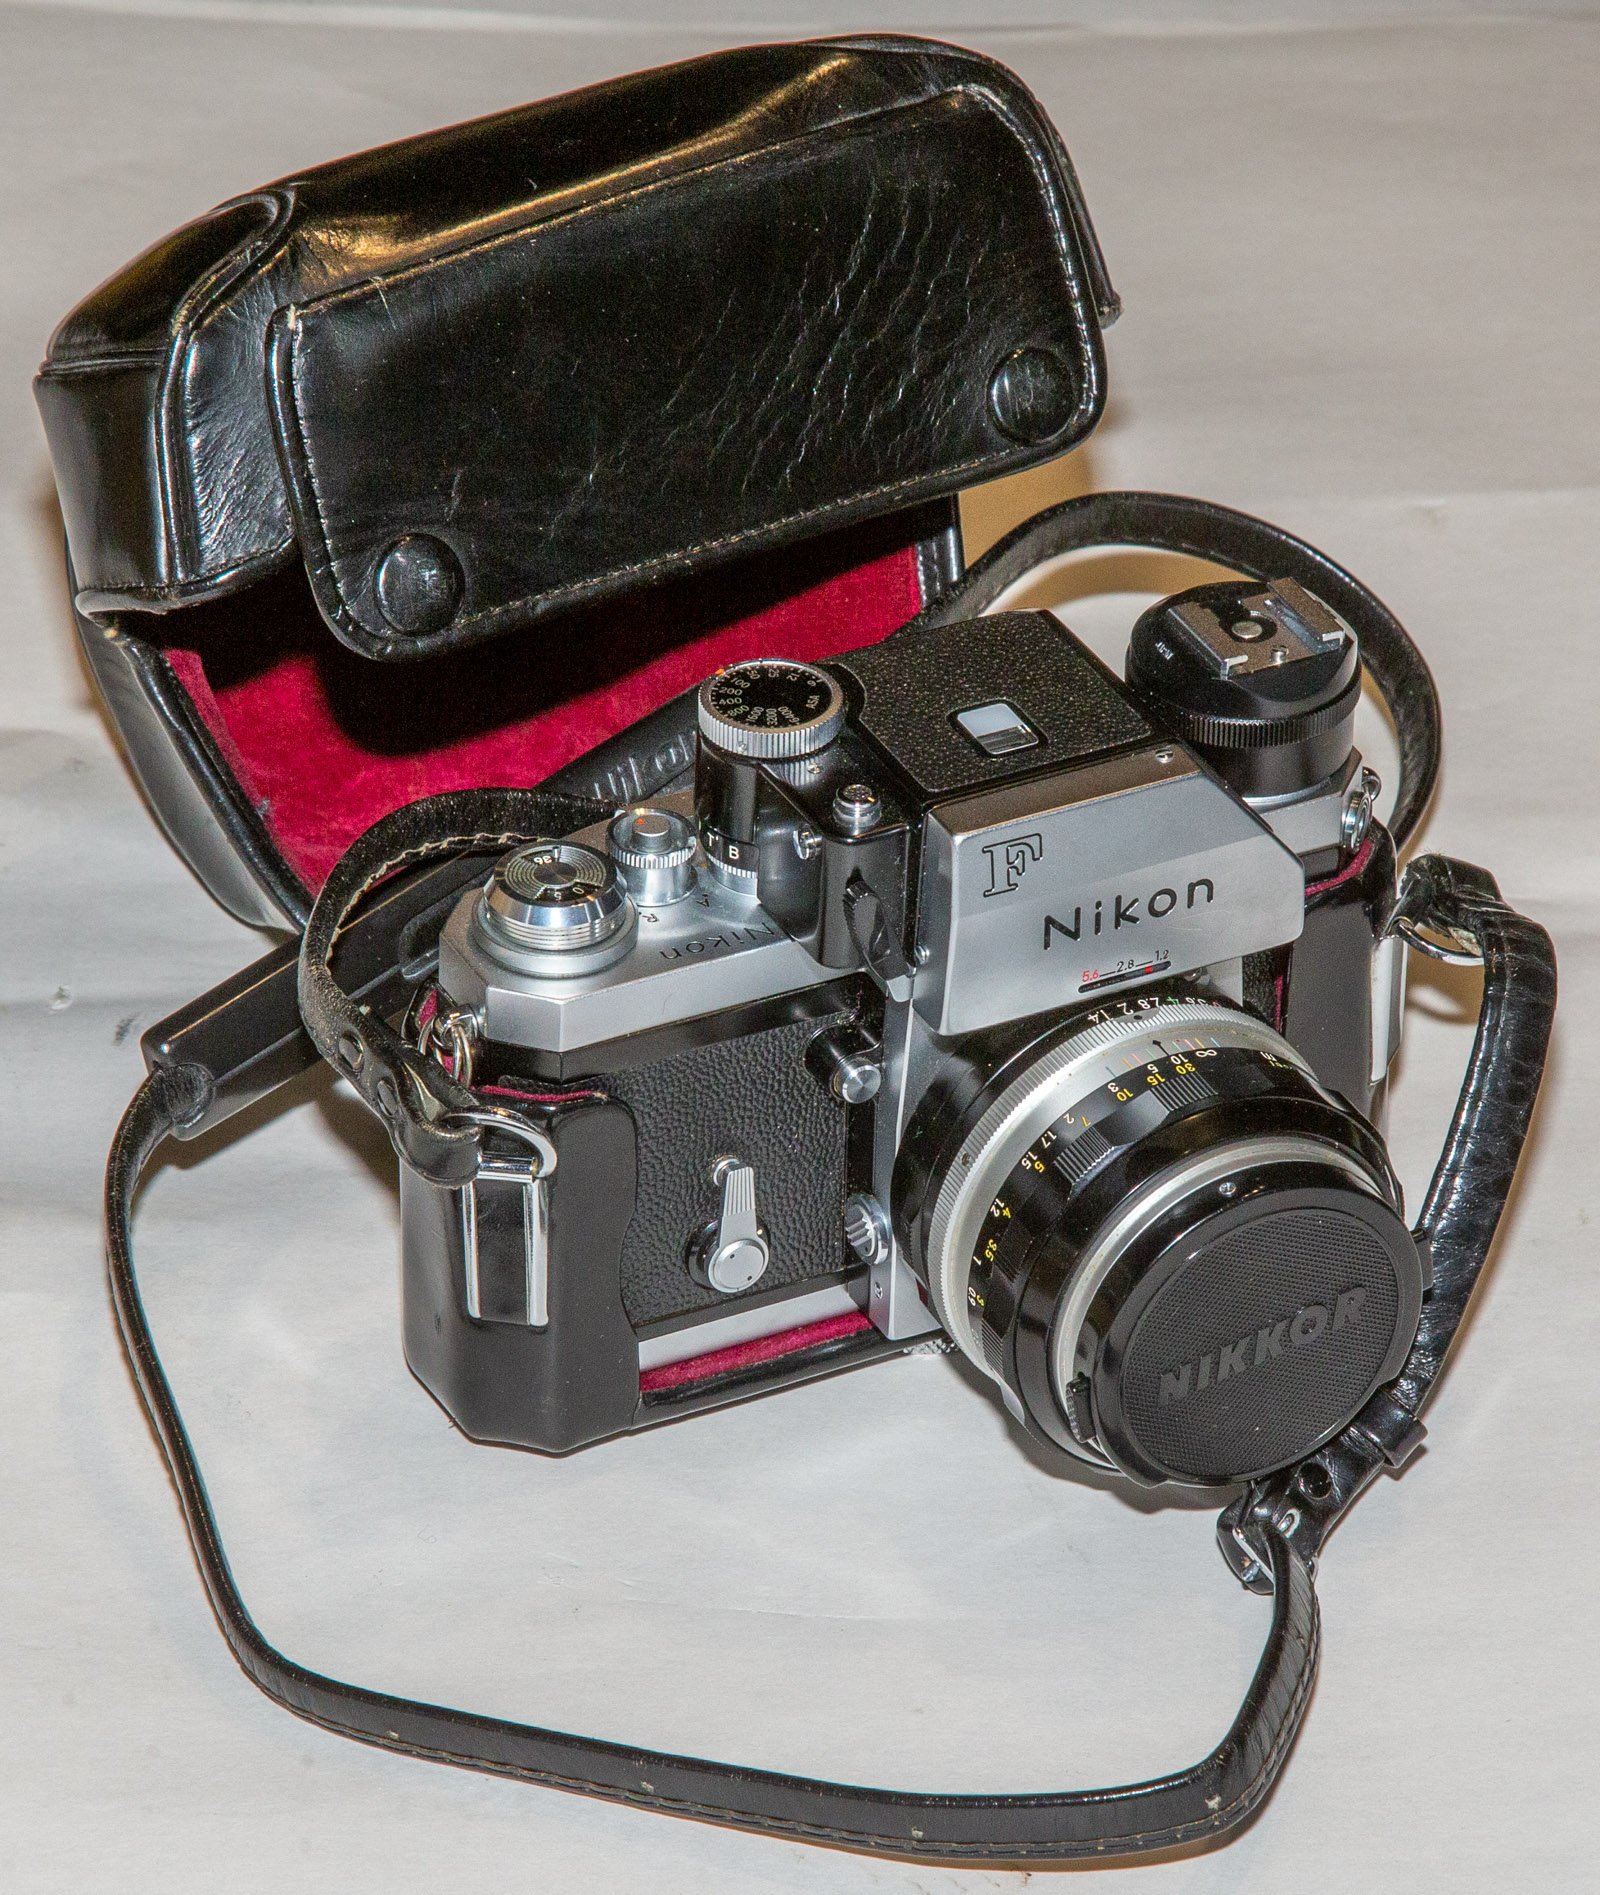 NIKON F CAMERA With soft case and instruction